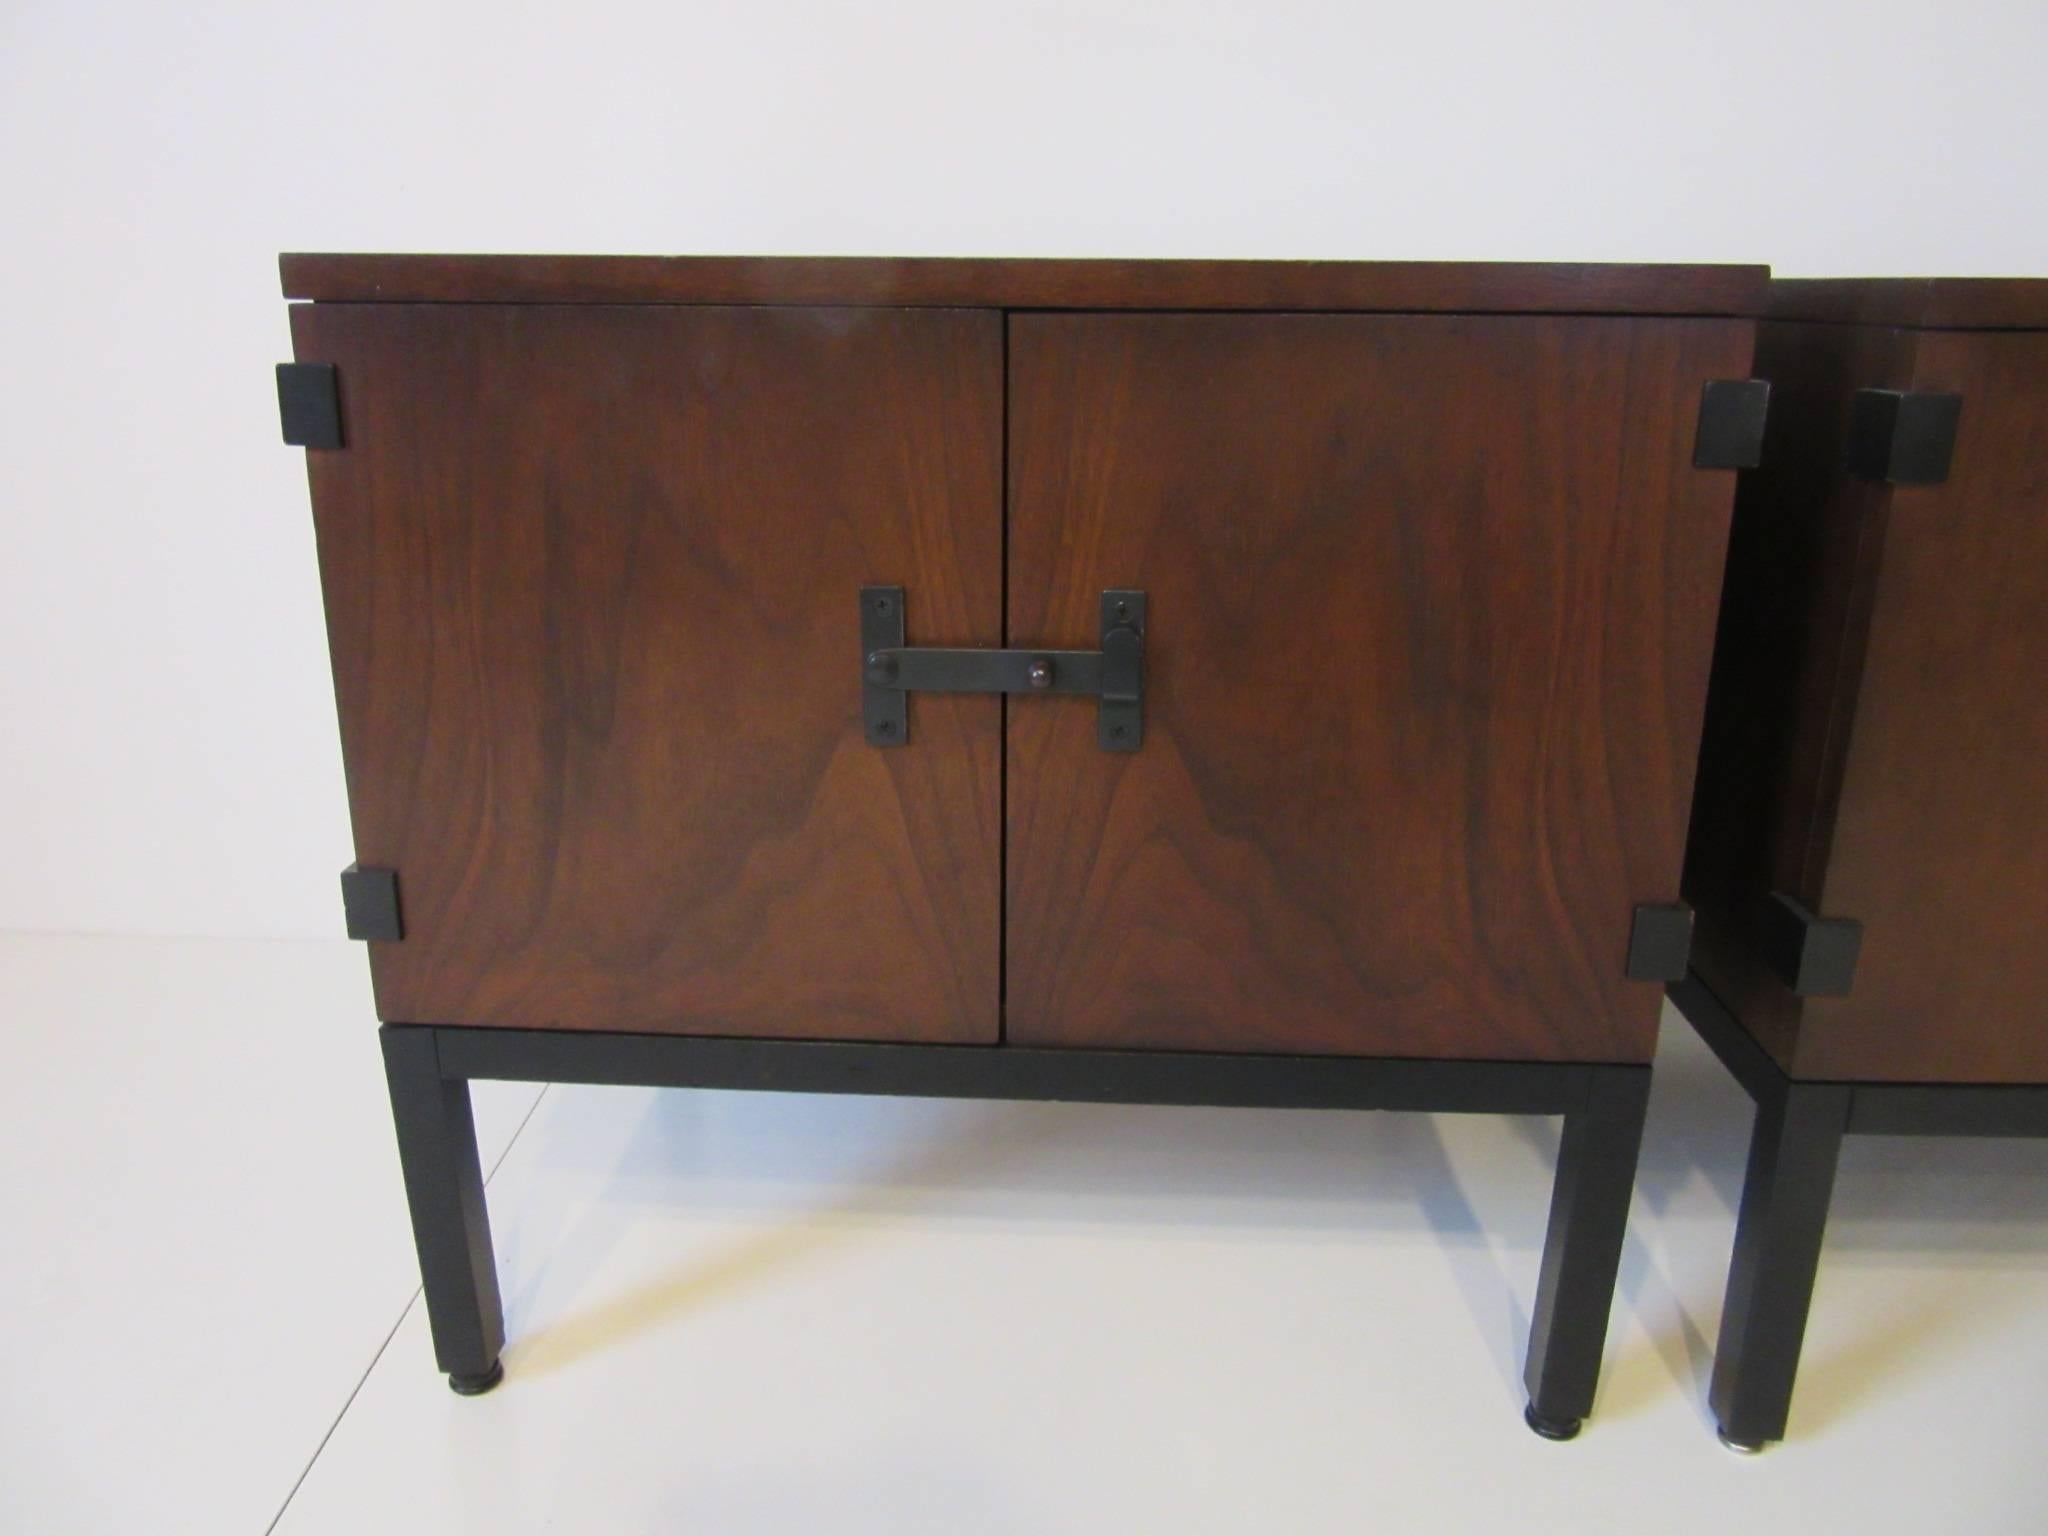 A pair of dark walnut nightstands with double doors and open storage, satin black hardware and leg frames detail the piece, manufactured by the Directional furniture Company.